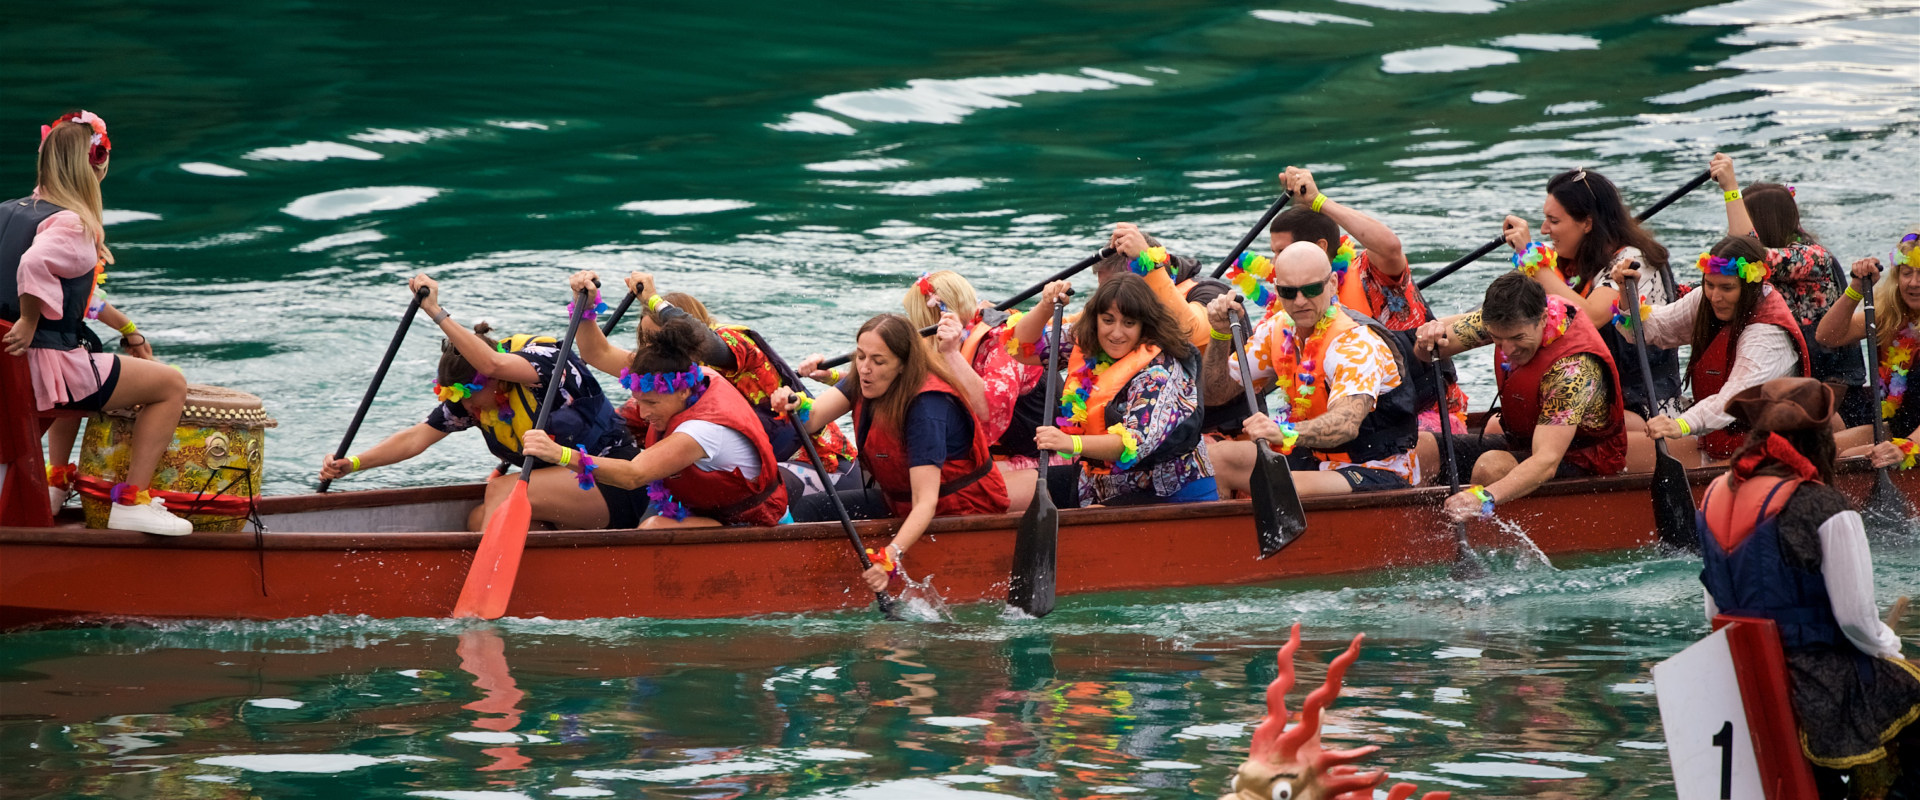 Dragon Boat Racing in Orlando, Florida: Rules and Regulations for a Safe and Enjoyable Experience